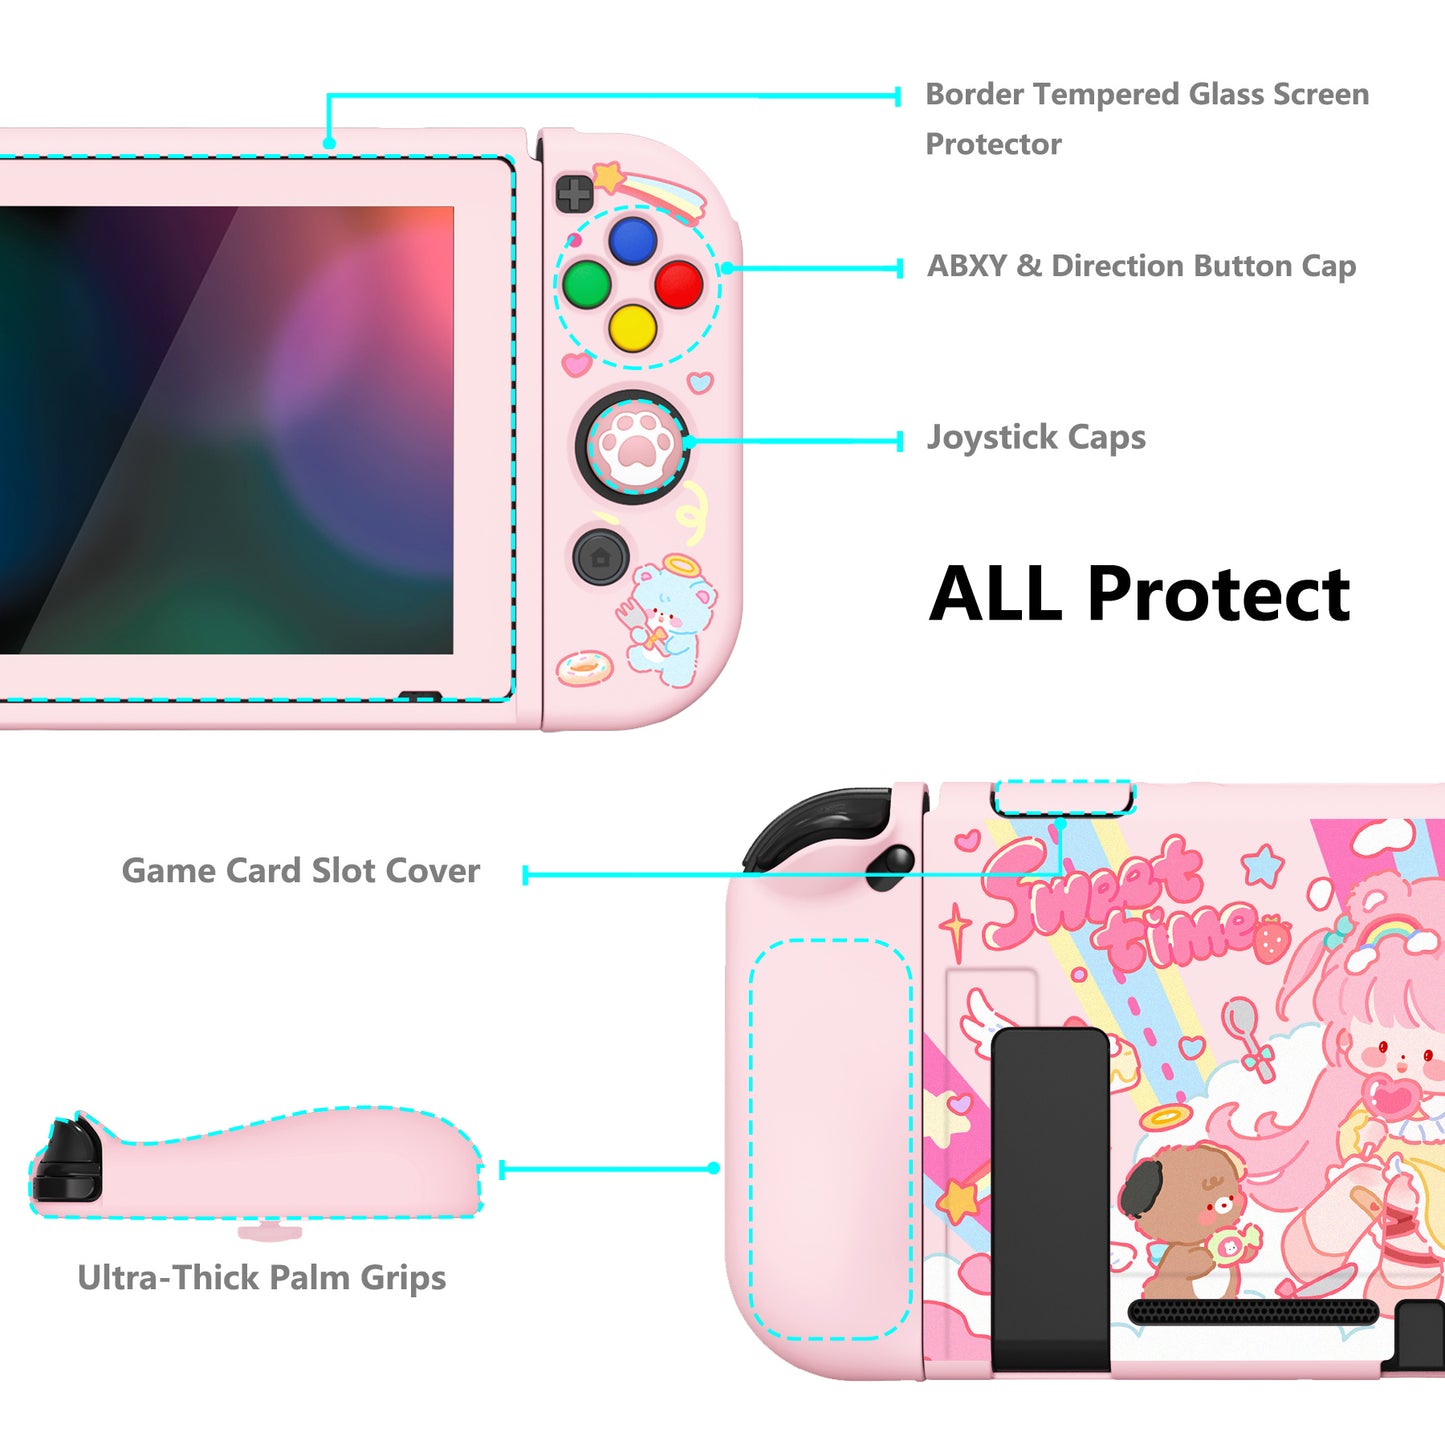 PlayVital ZealProtect Soft Protective Case for Nintendo Switch, Flexible Cover for Switch with Tempered Glass Screen Protector & Thumb Grips & ABXY Direction Button Caps - Sweet Time - RNSYV6037 playvital